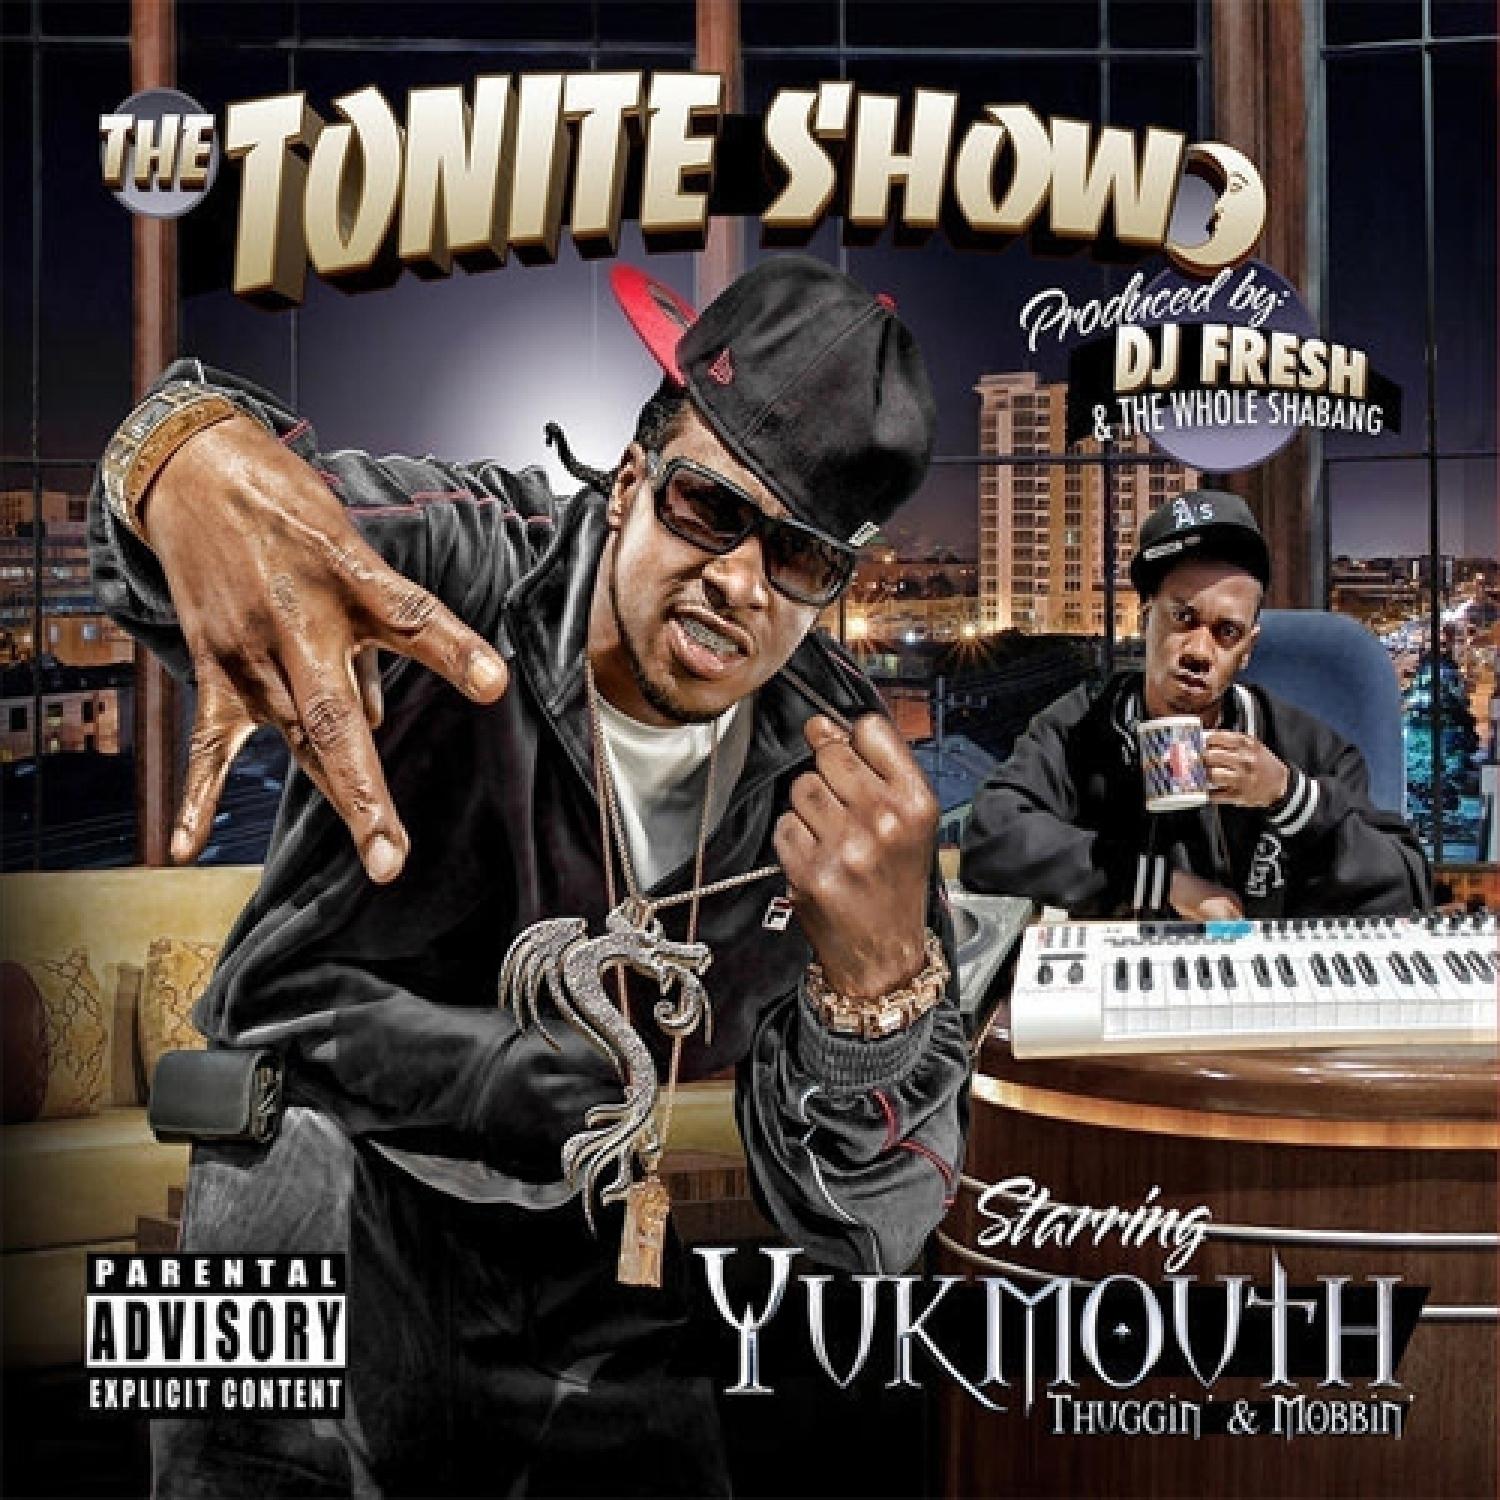 The Tonite Show With Yukmouth!